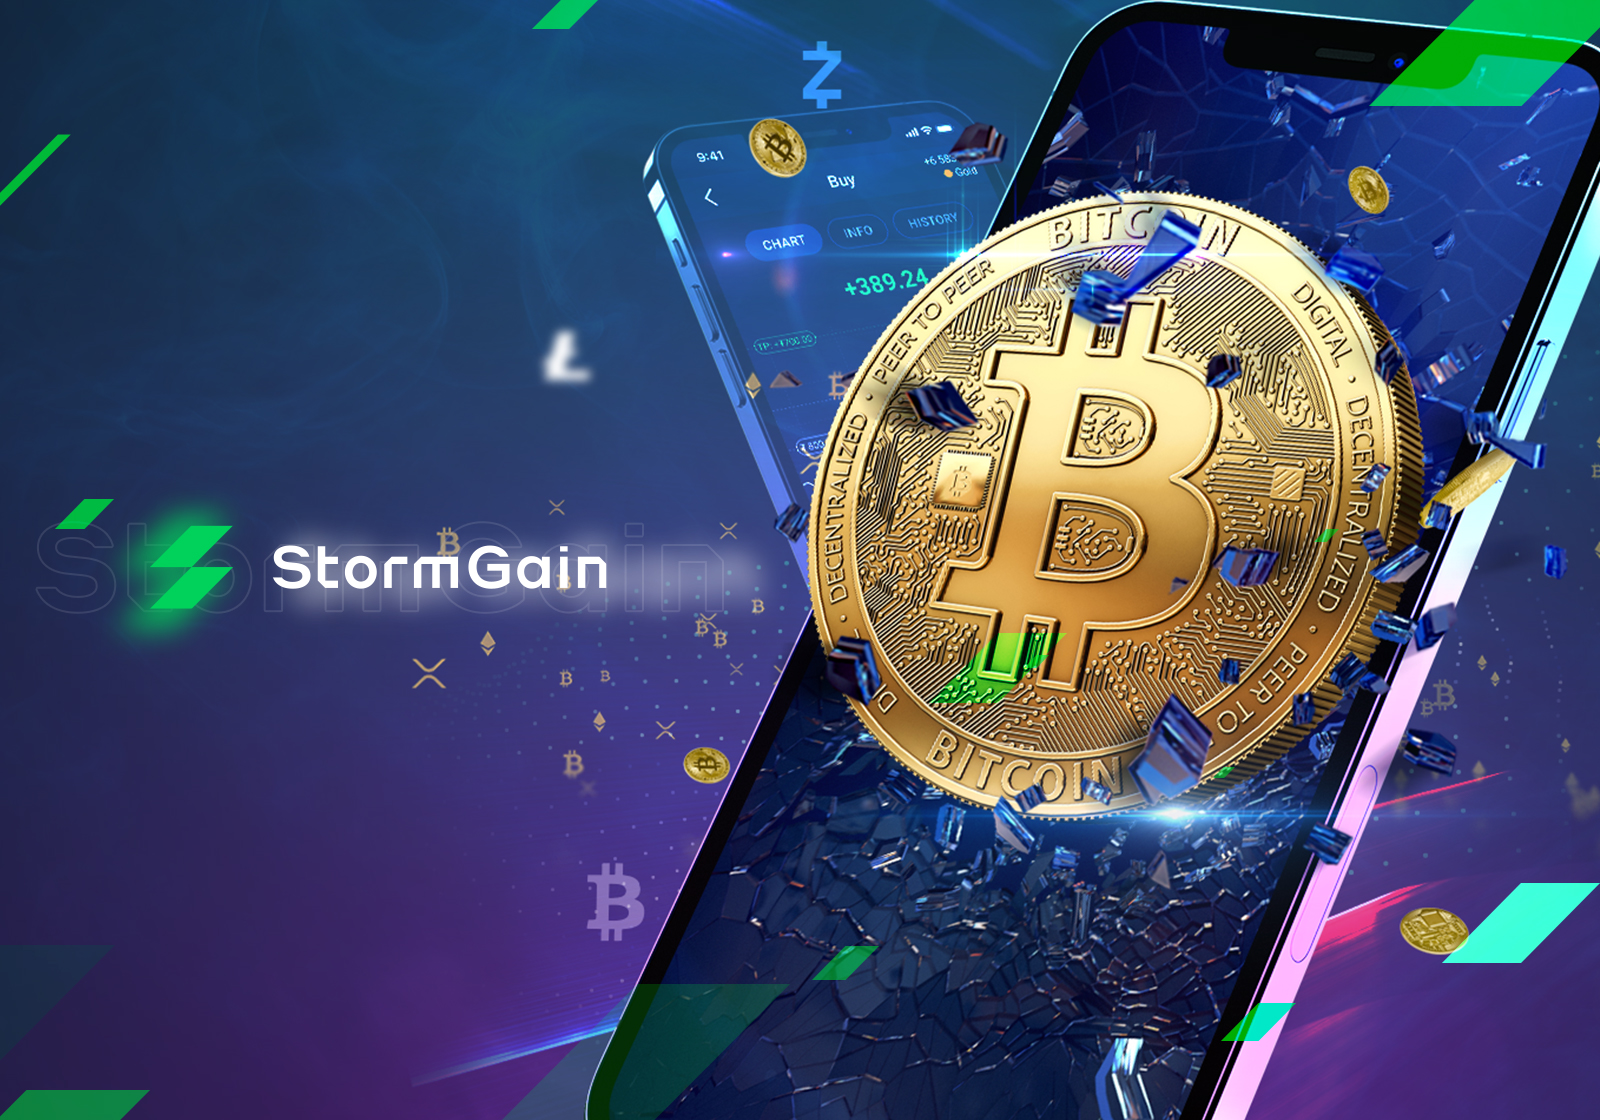 StormGain Holiday Giveaway: Win Fantastic Prizes, Including Fast Mining and Free Crypto